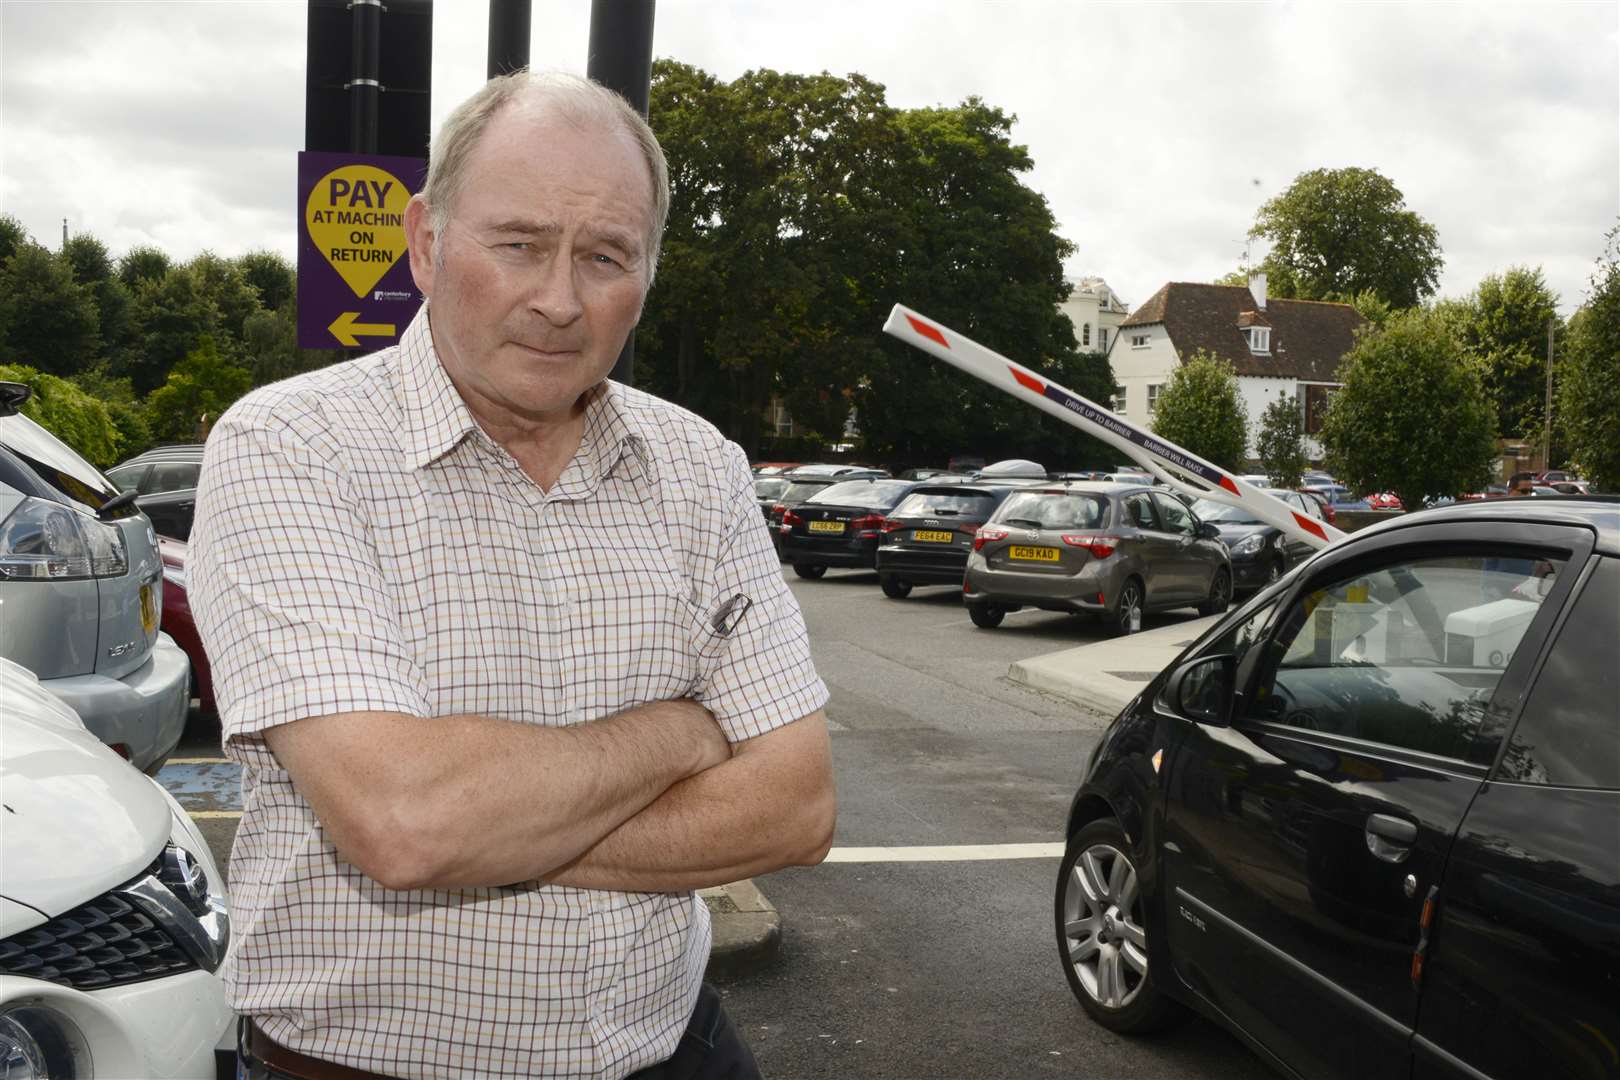 Mark Warburton was hit by a barrier in Watling Street car park. Picture: Paul Amos